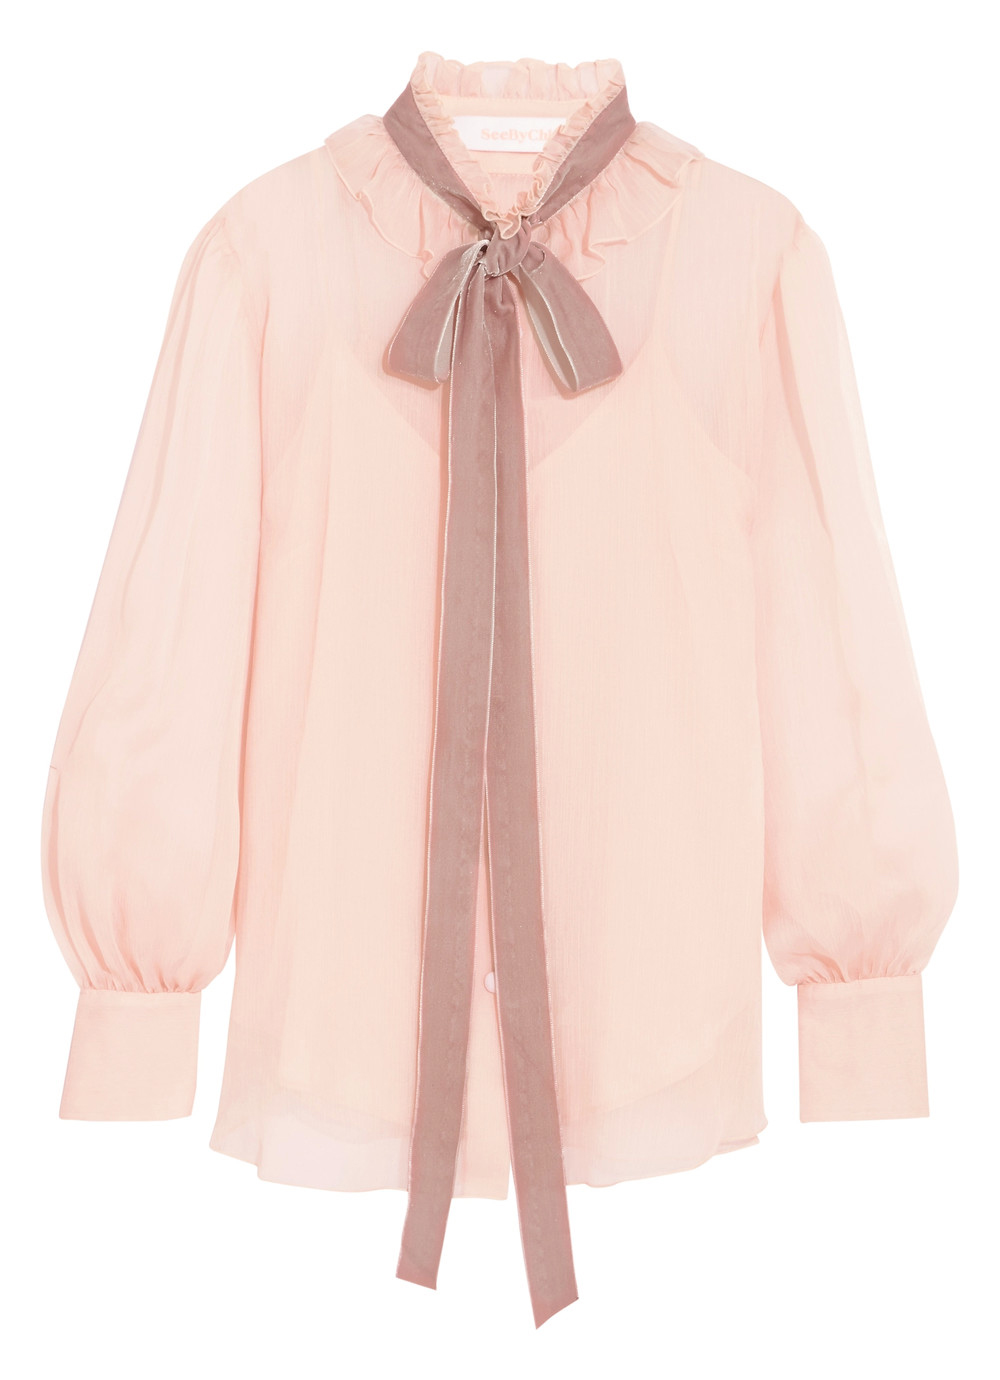 The Blouse: See by Chloe, $565, from Net-a-Porter